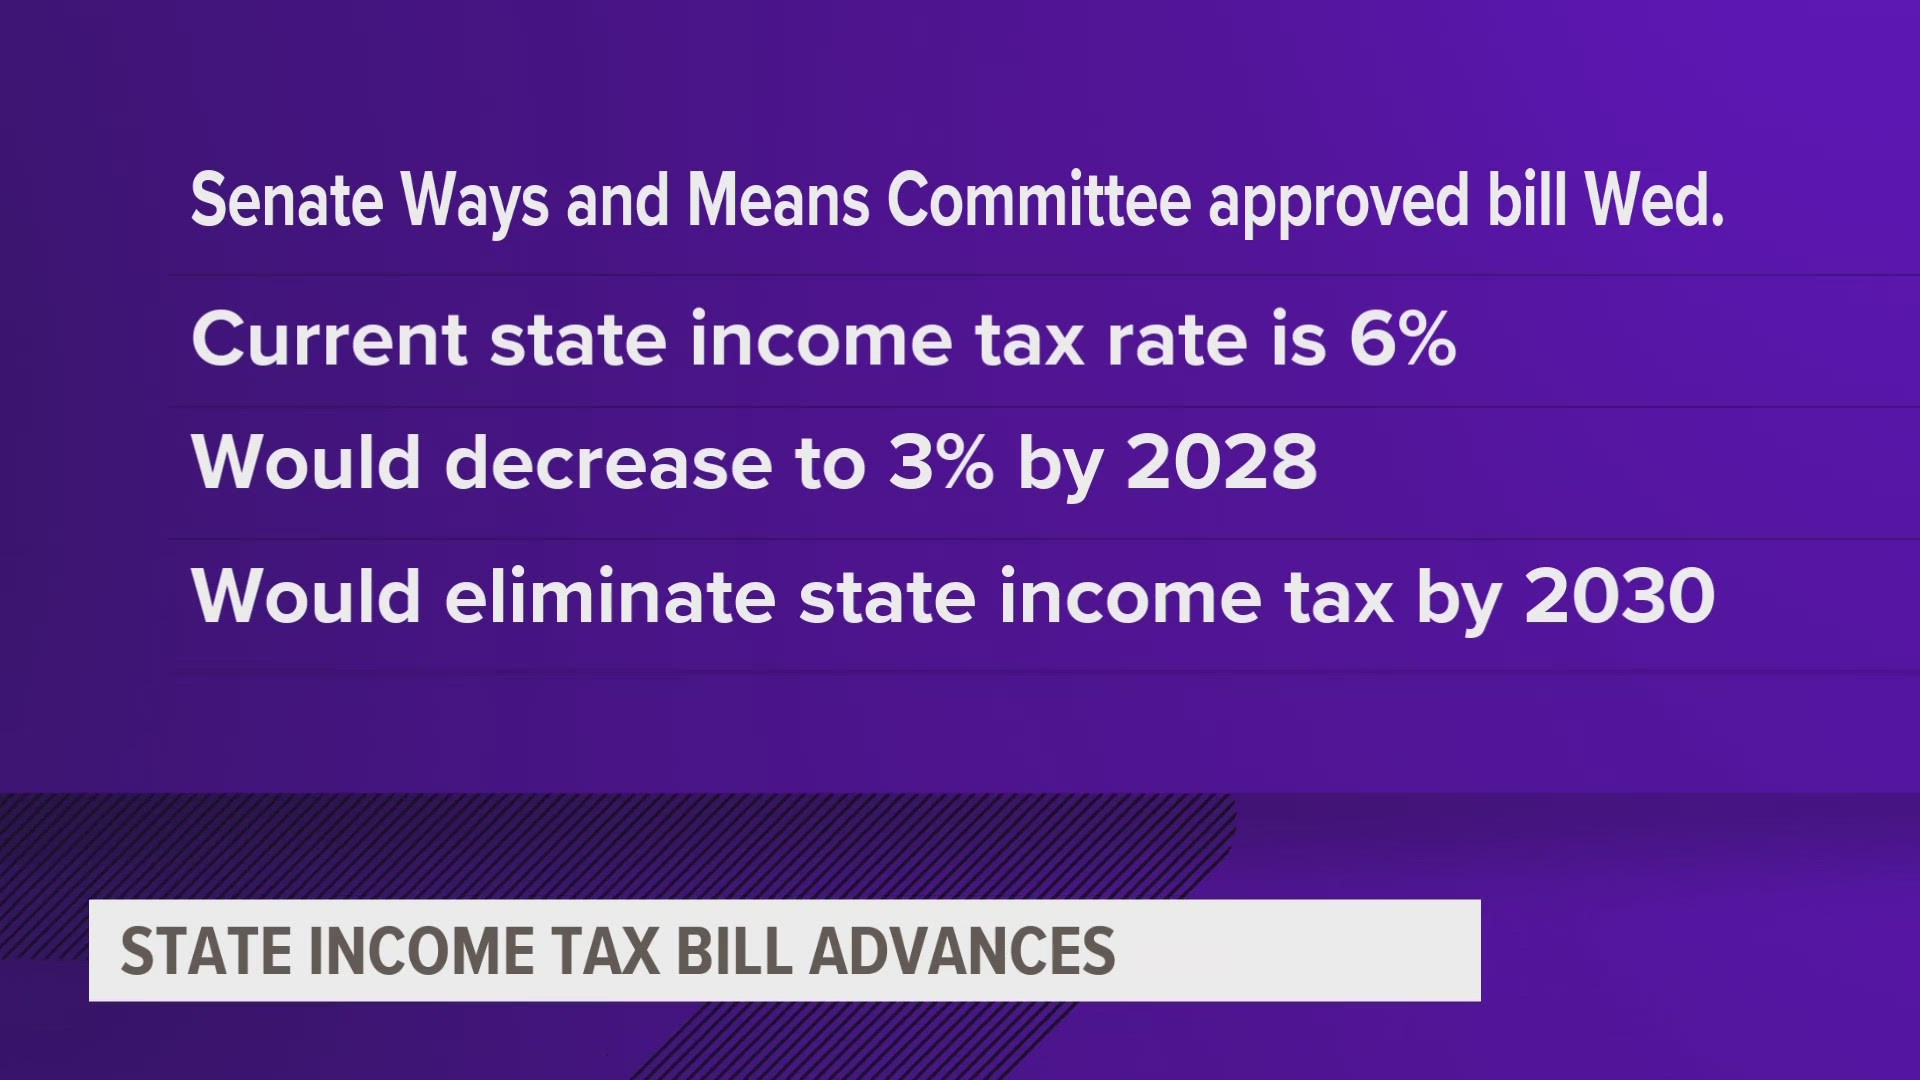 The Senate Ways and Means Committee approved the bill Wednesday. Currently, the state income tax is 6%.